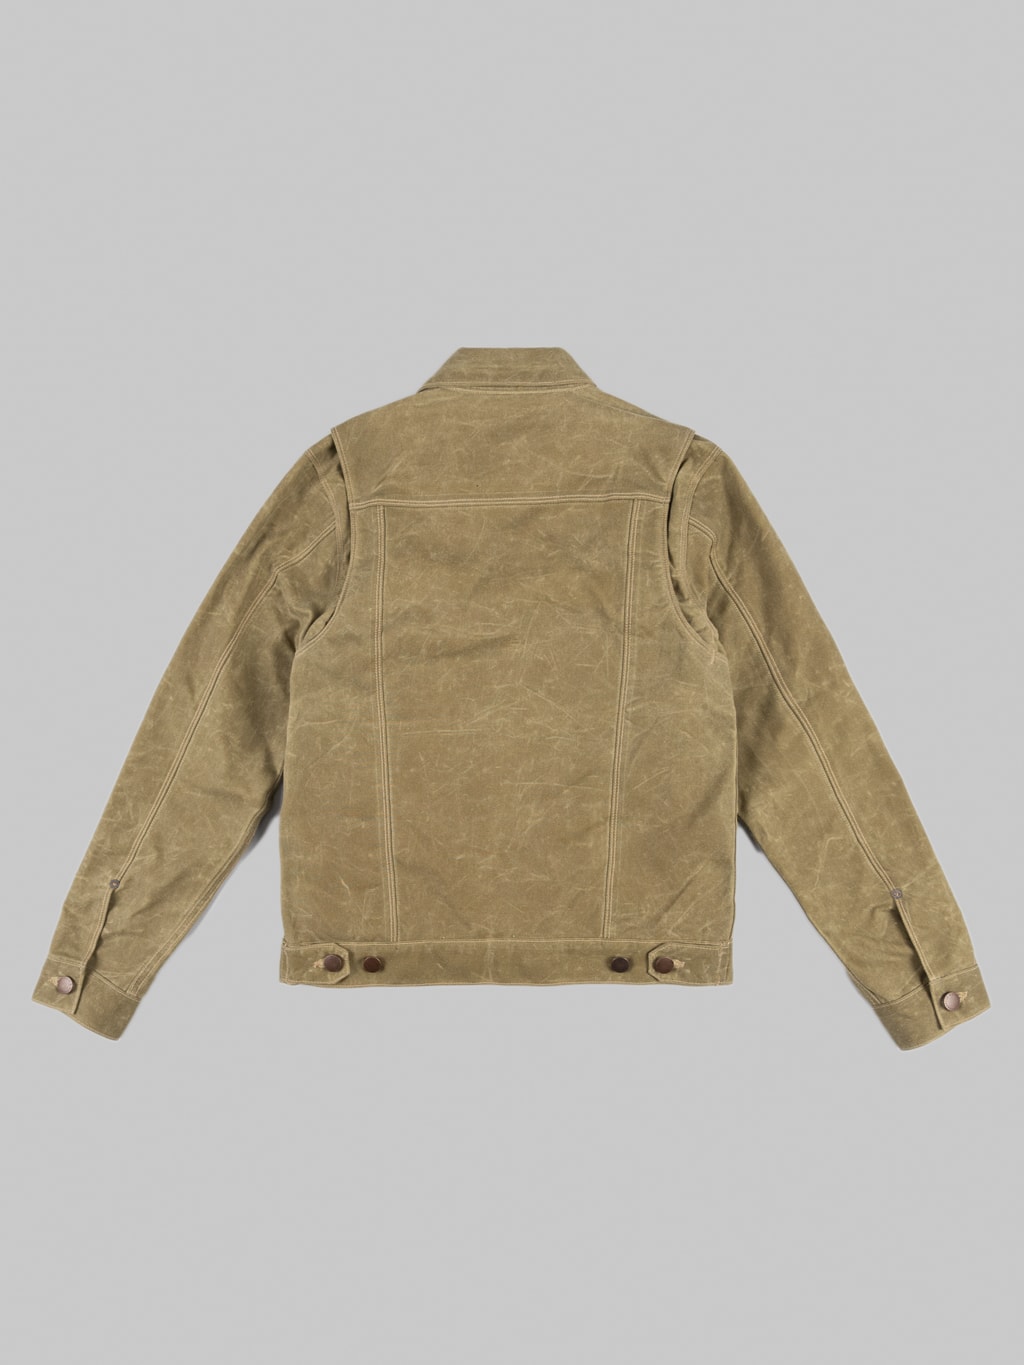 Freenote Cloth Riders Jacket Waxed Canvas Tobacco made in USA